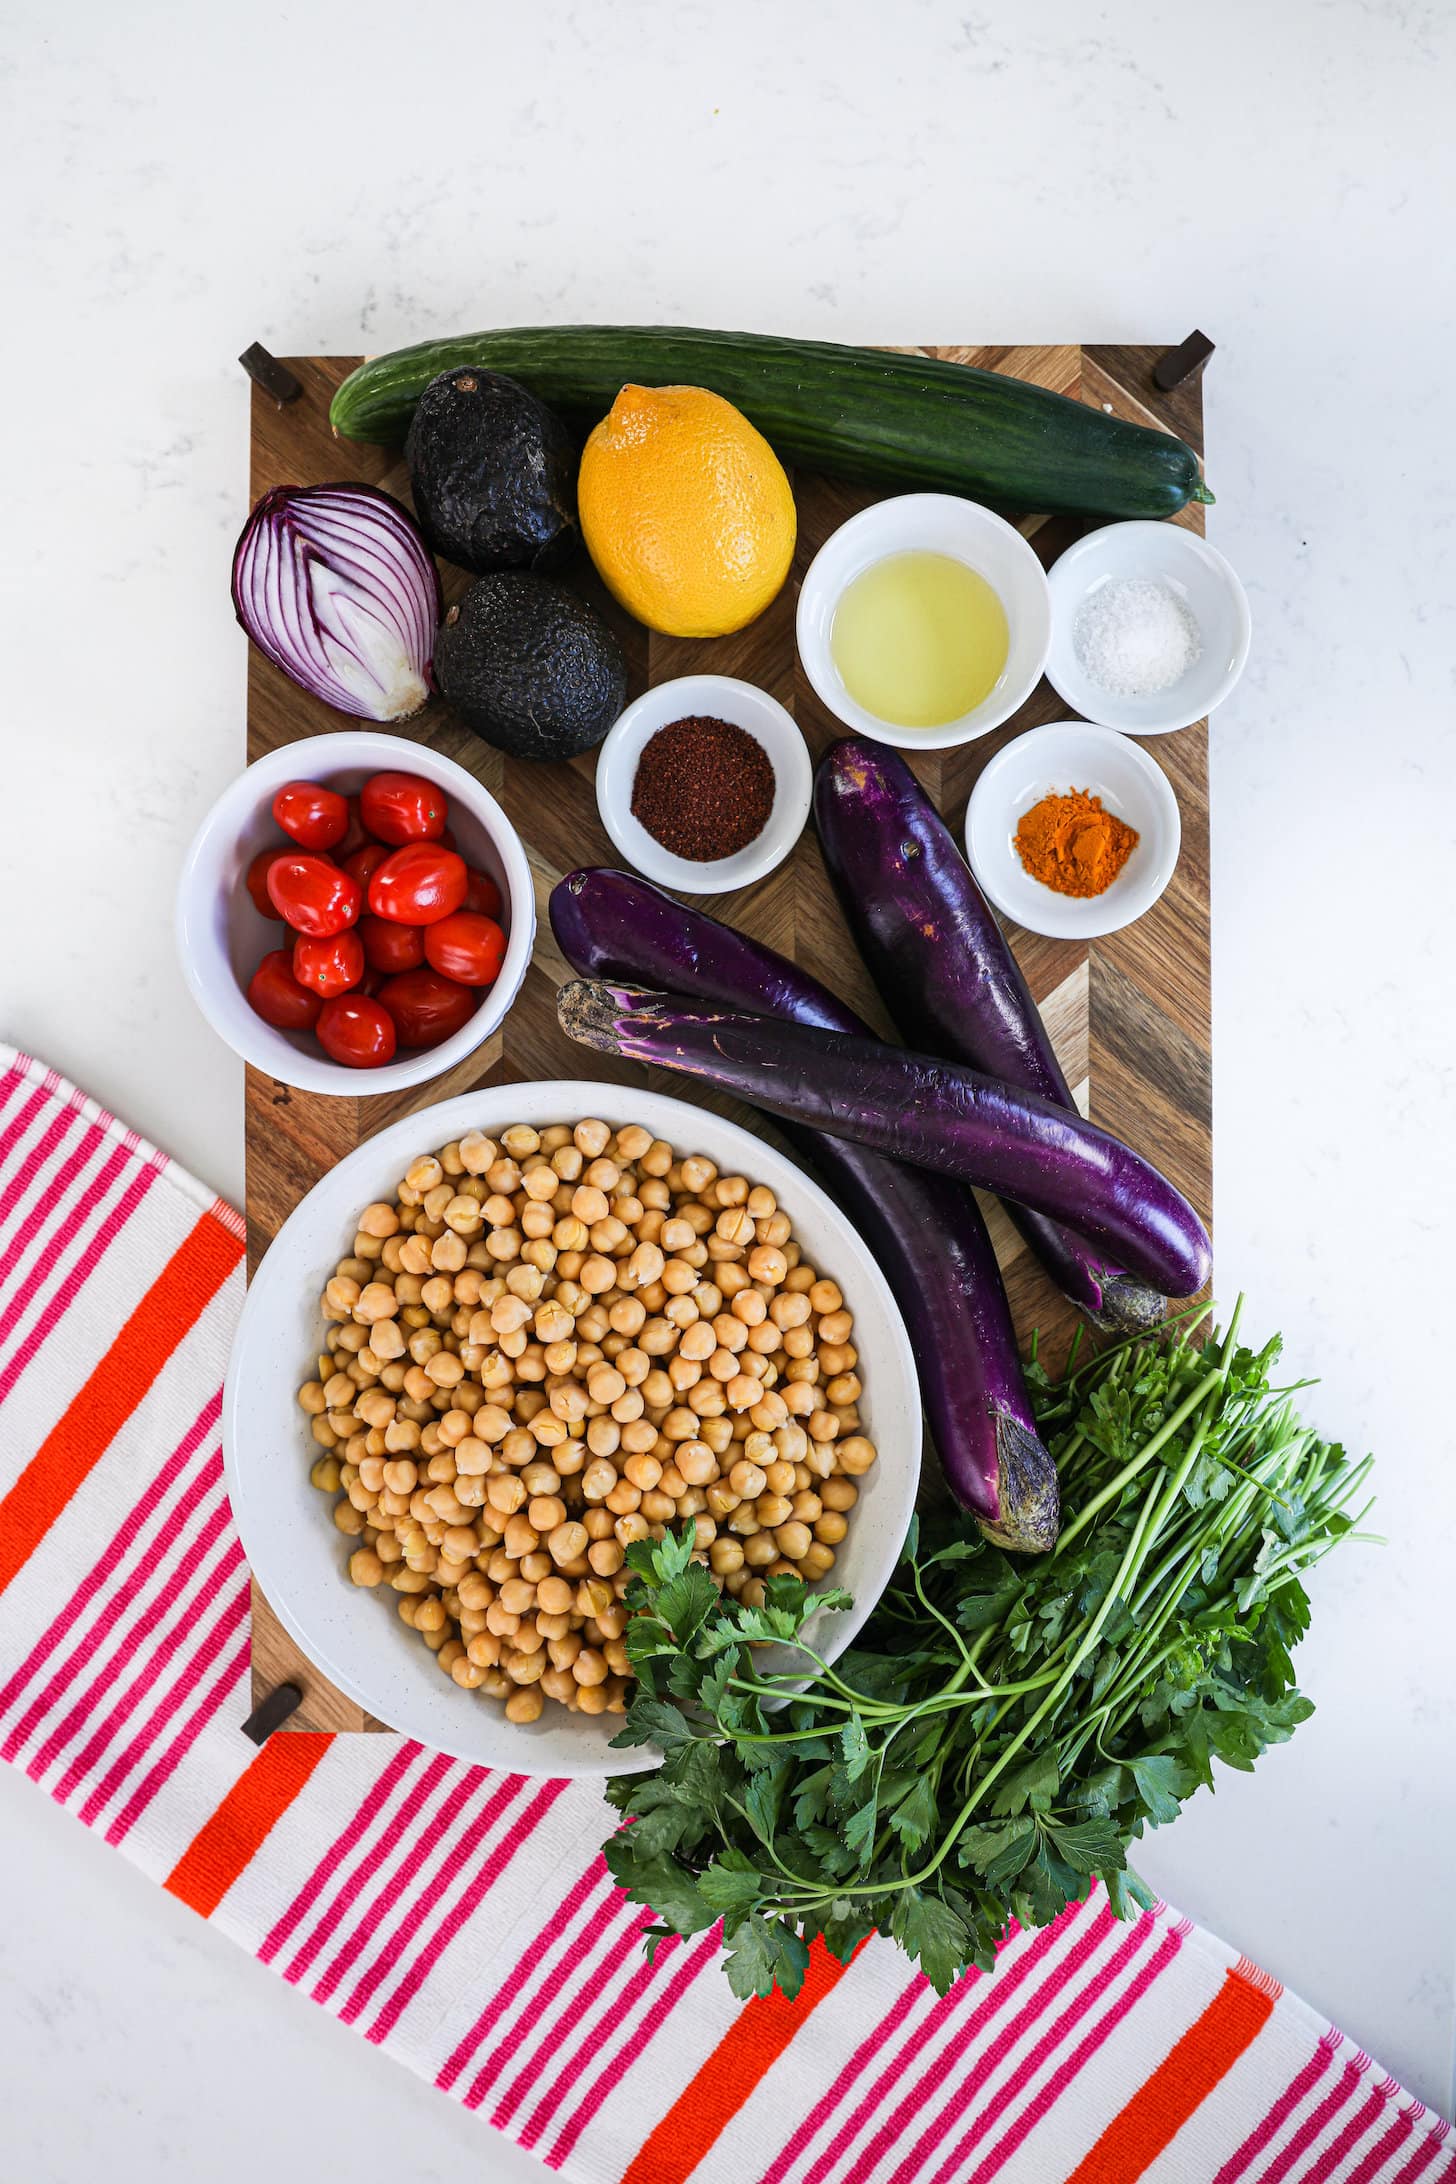 food ingredients on a wooden board including chickpeas, eggplants, tomatoes and spices.